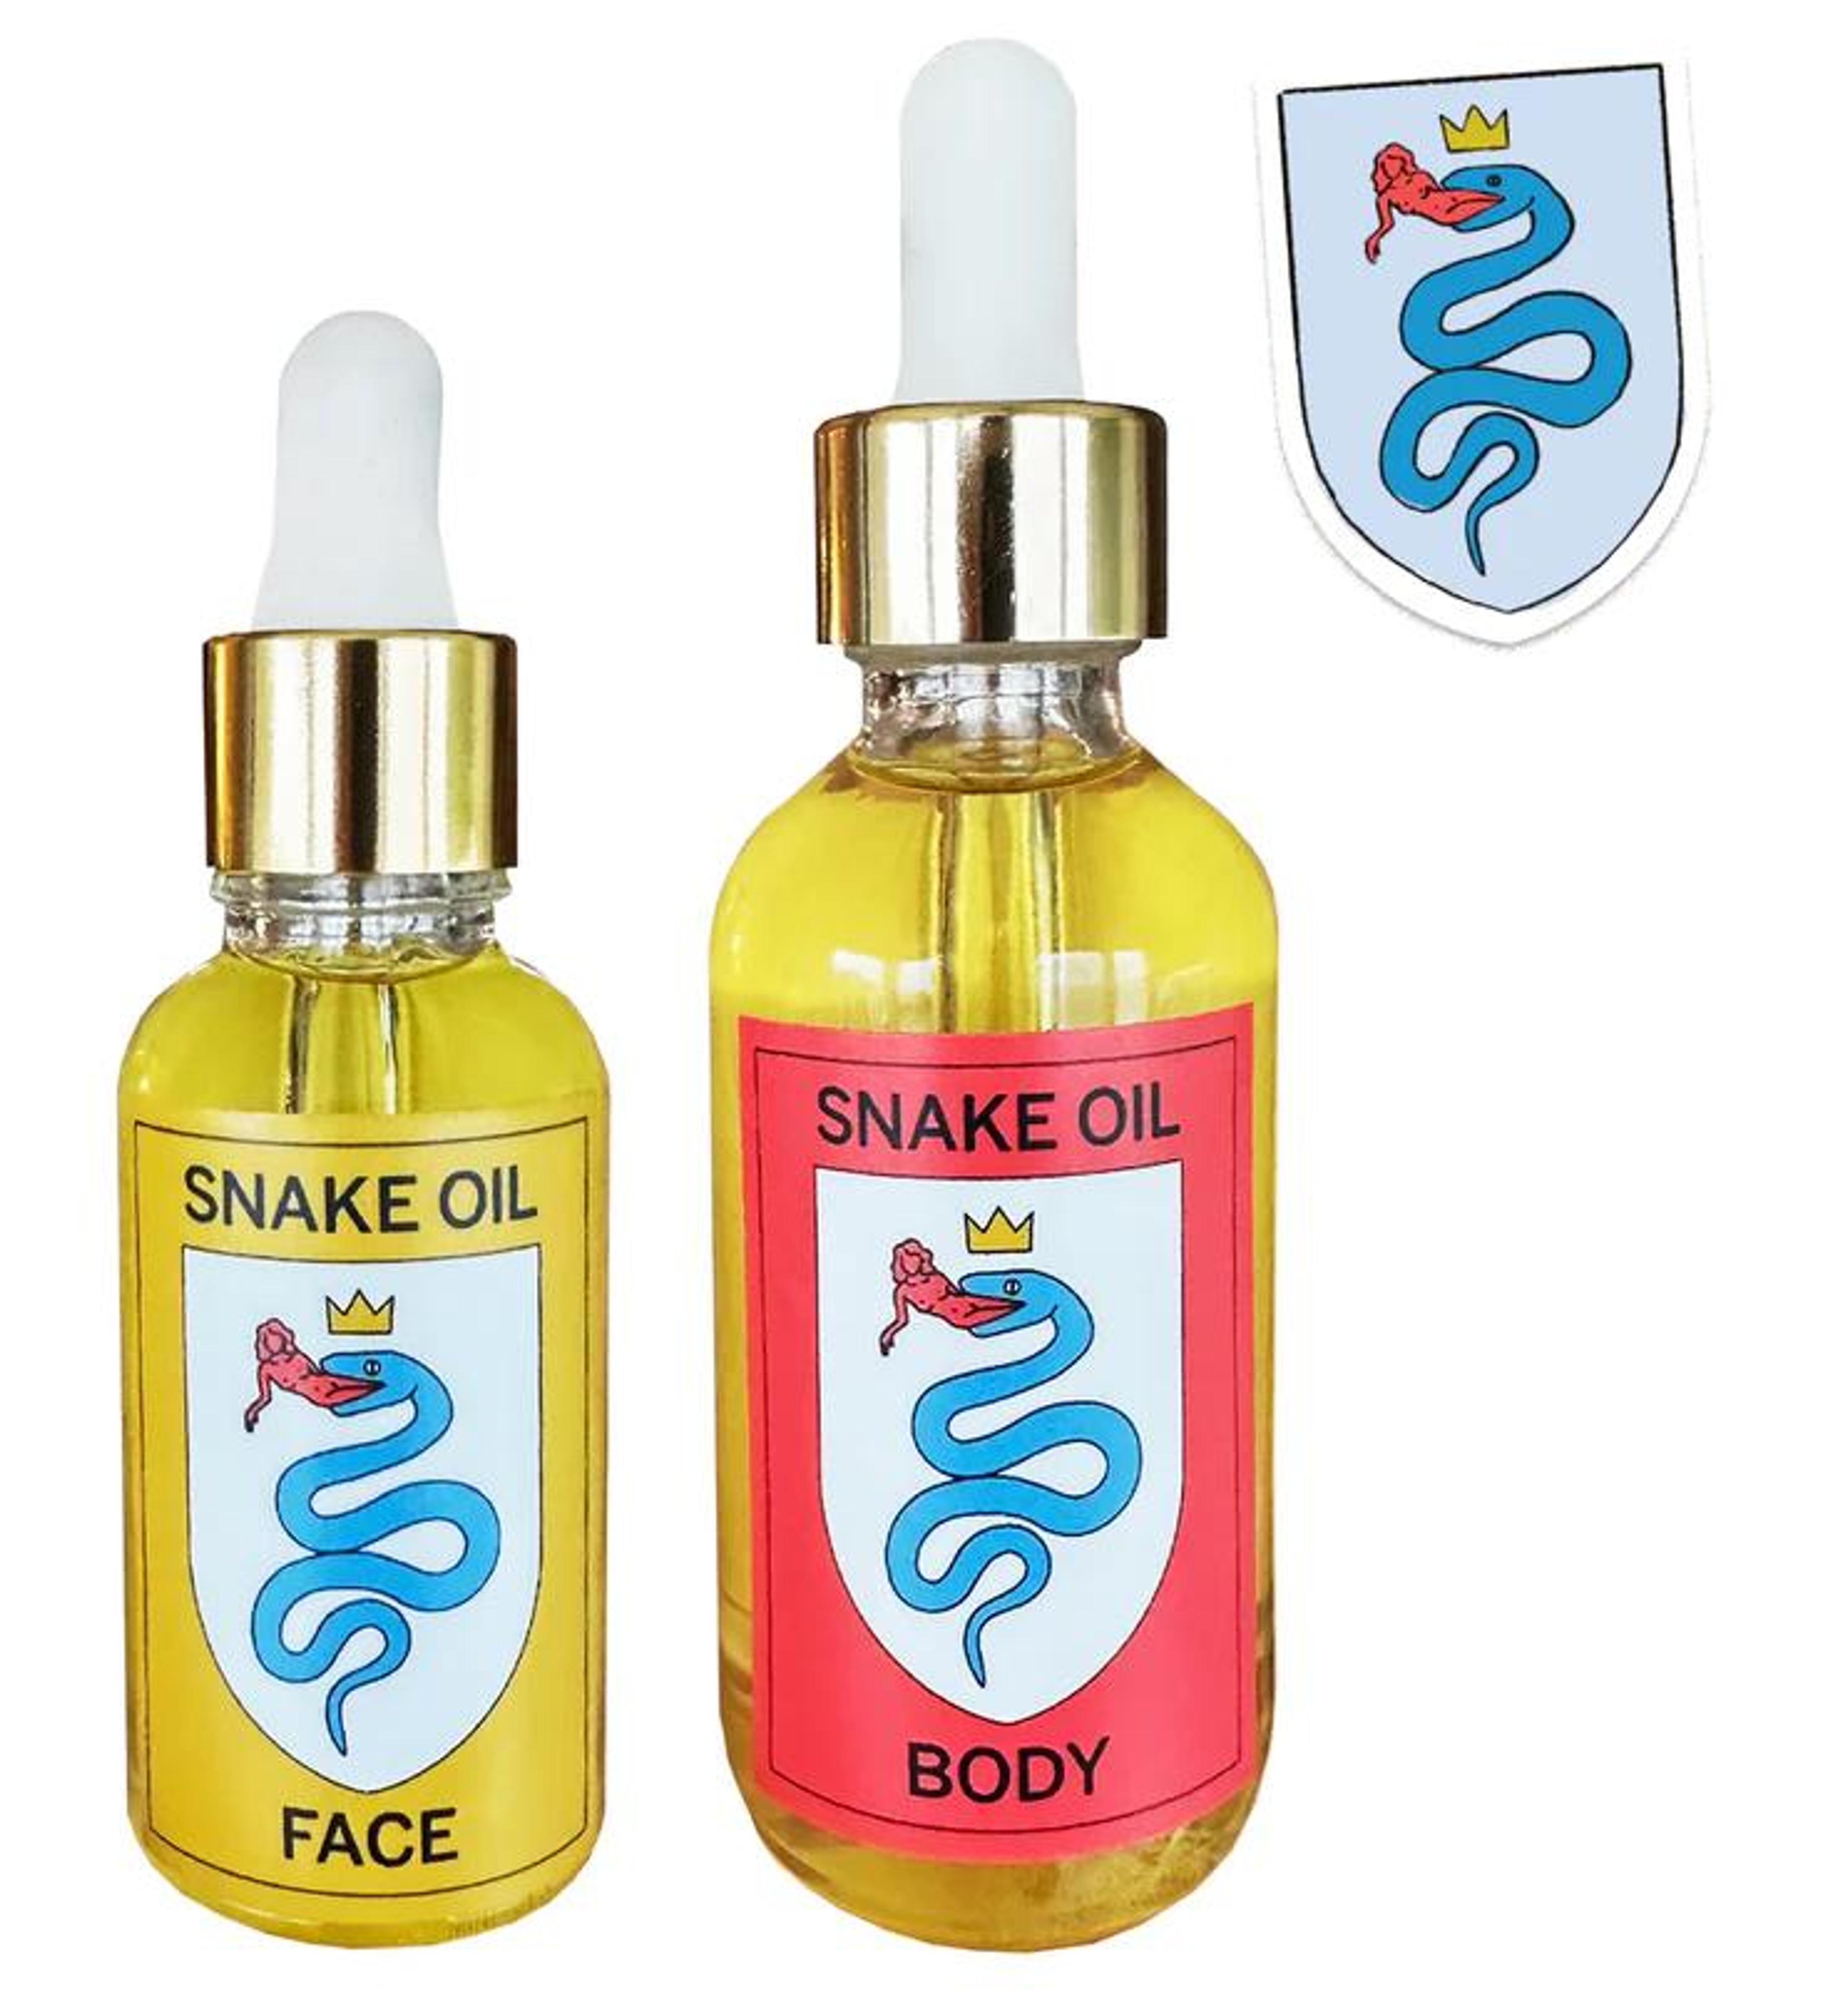 Caroline Calloway’s “Snake Oil” skincare products